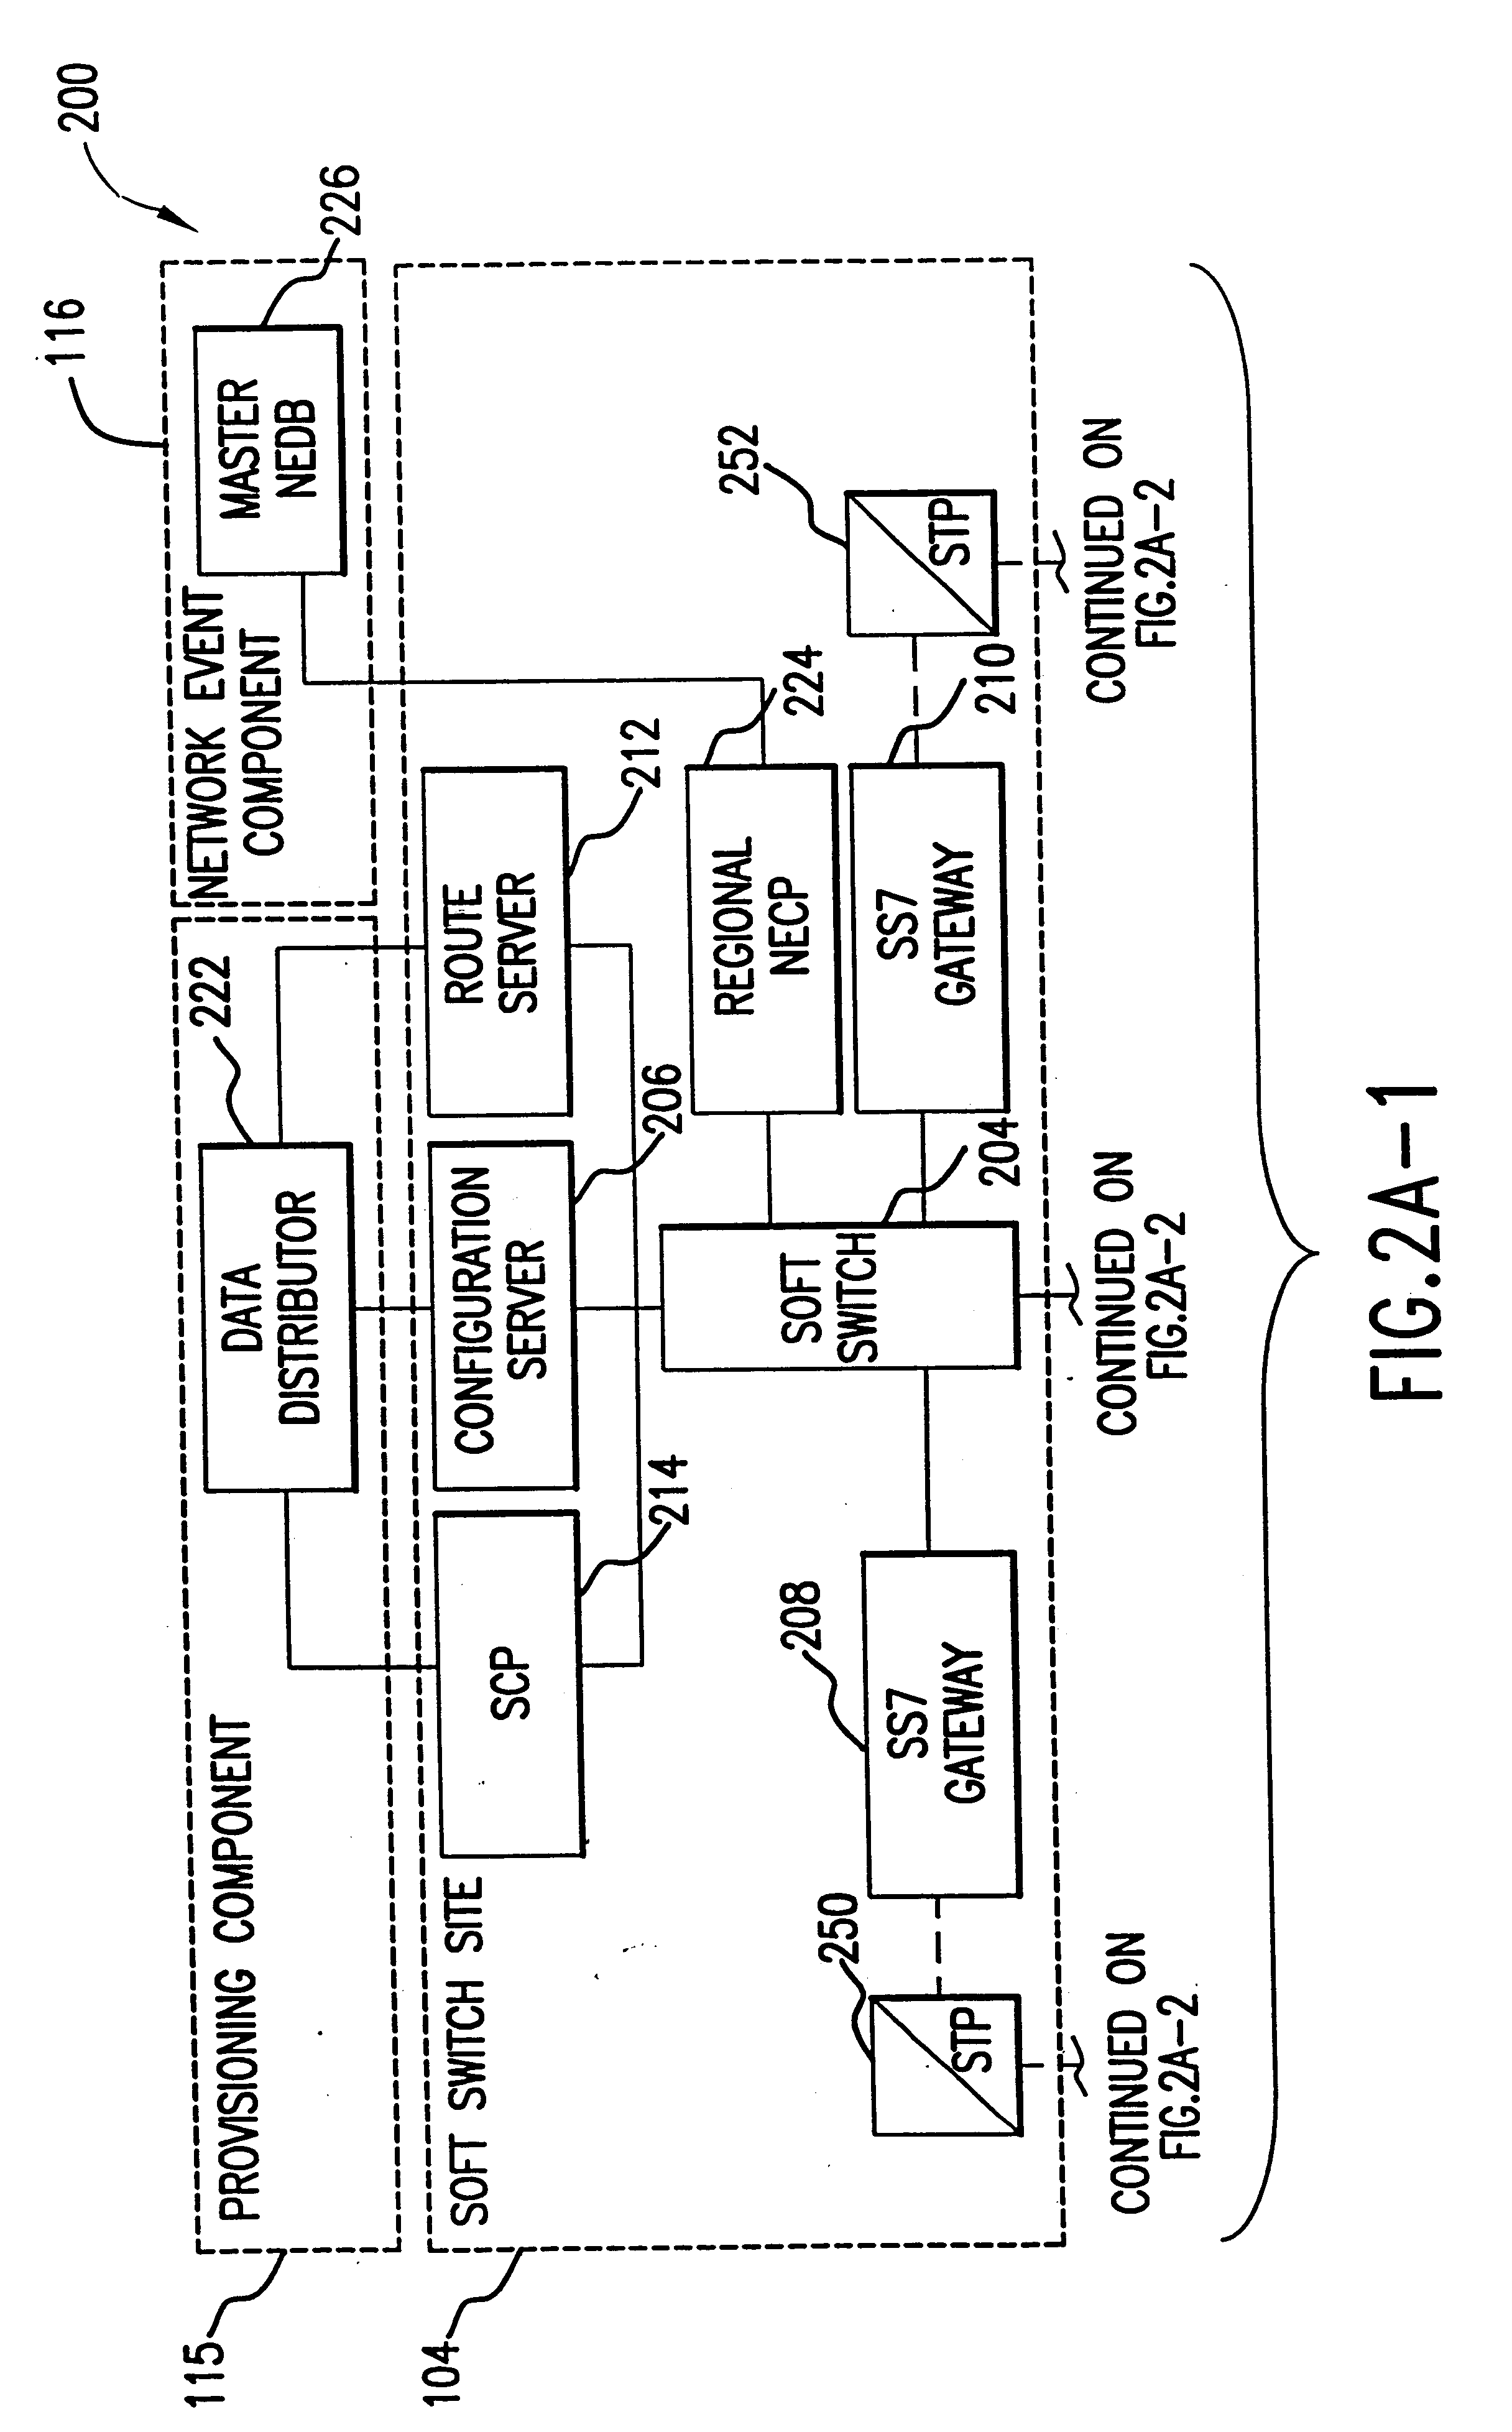 Voice over data telecommunications network architecture